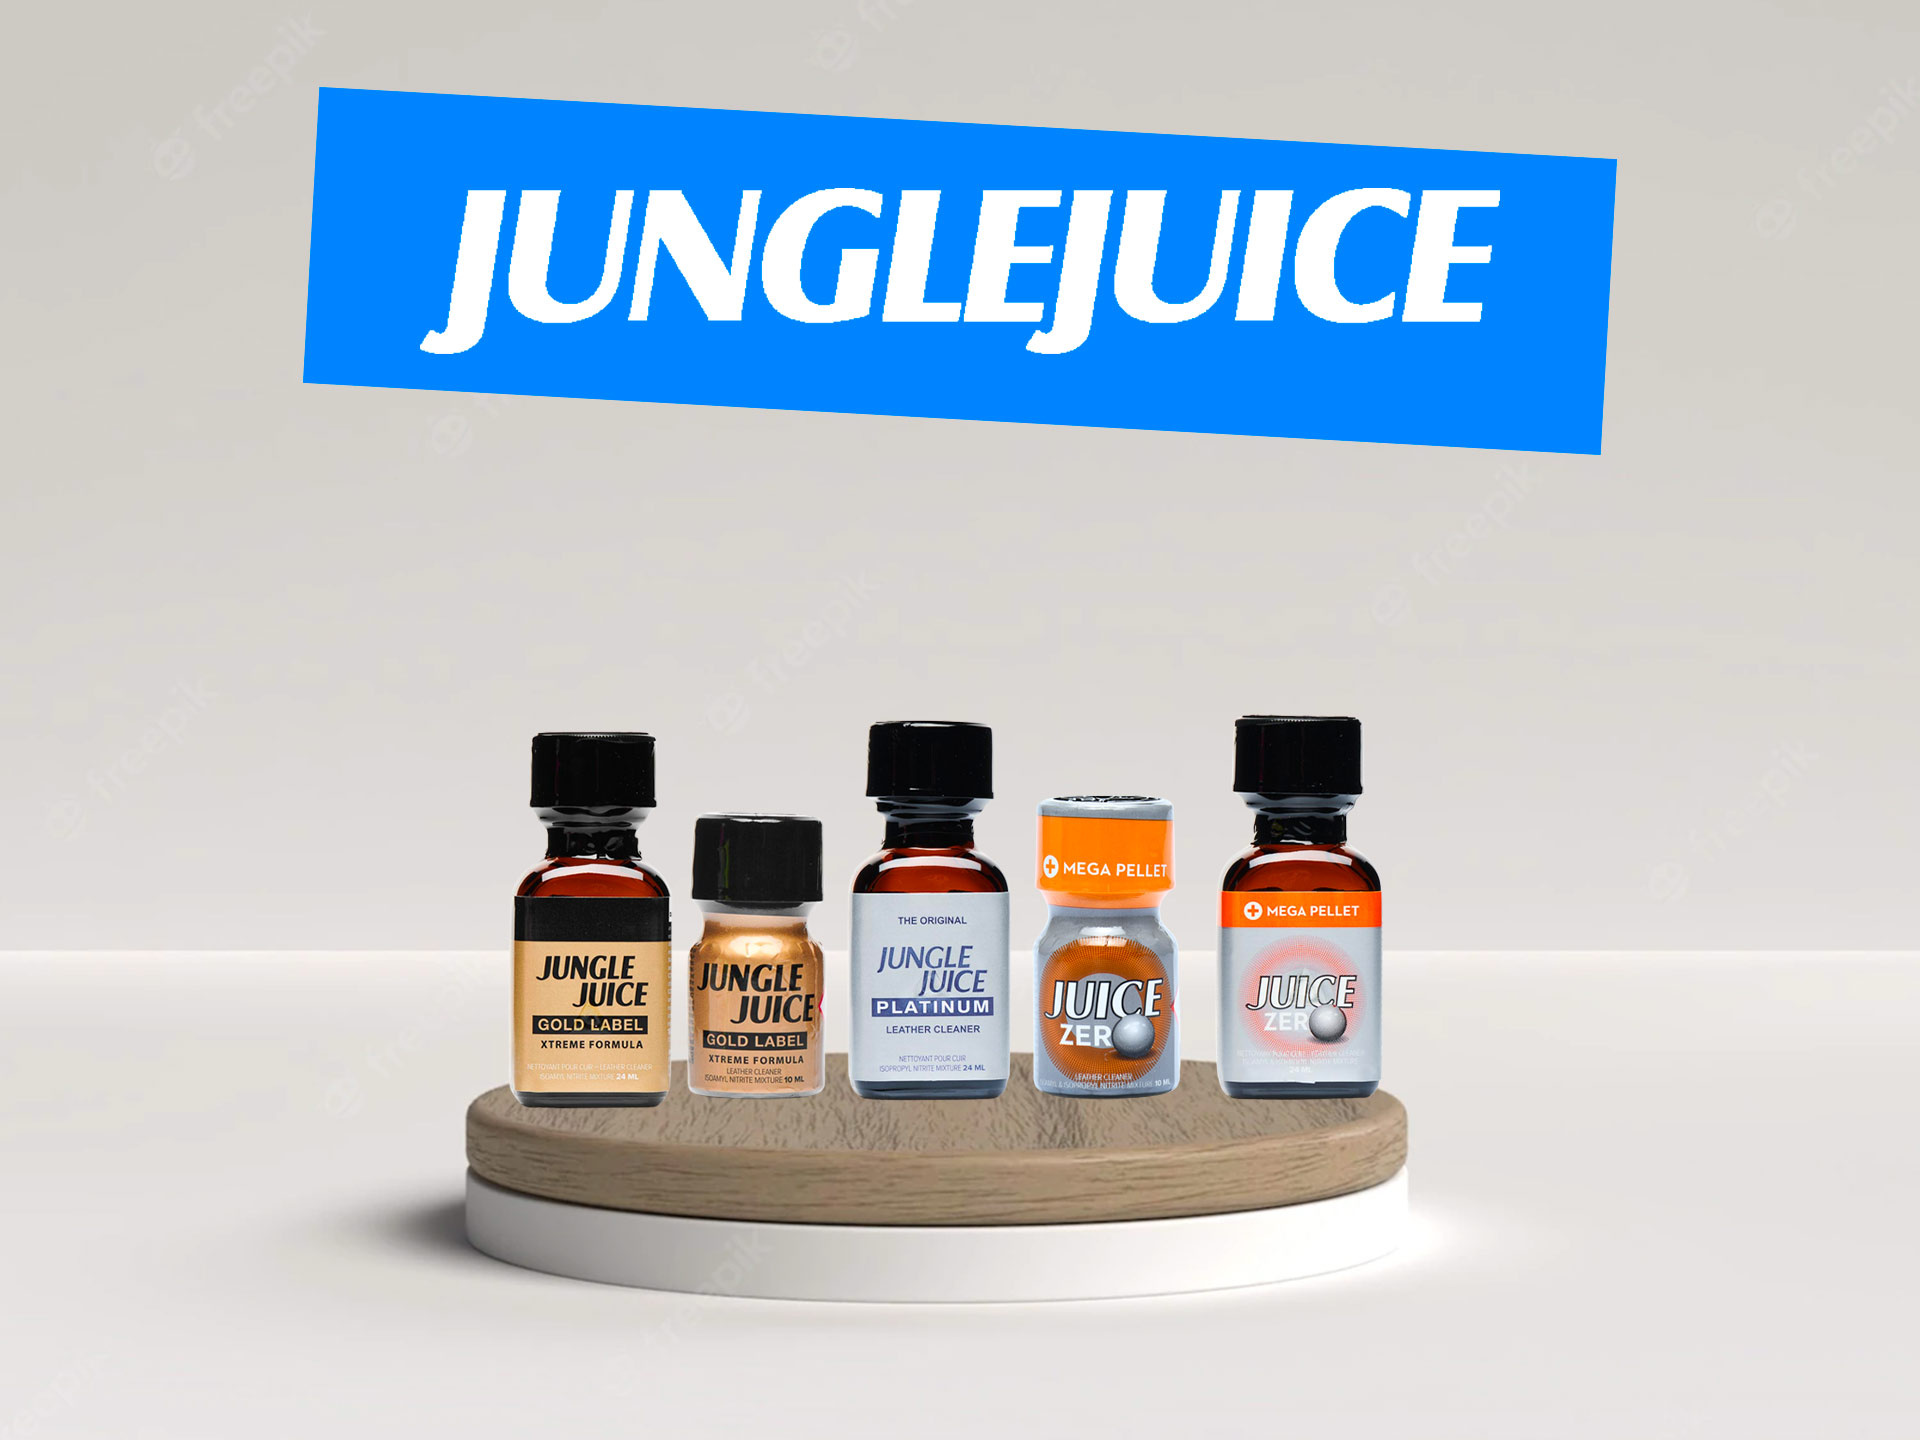 Read more about the article <strong>Jungle Juice, entdecken Sie diese trendige Poppers-Marke</strong>